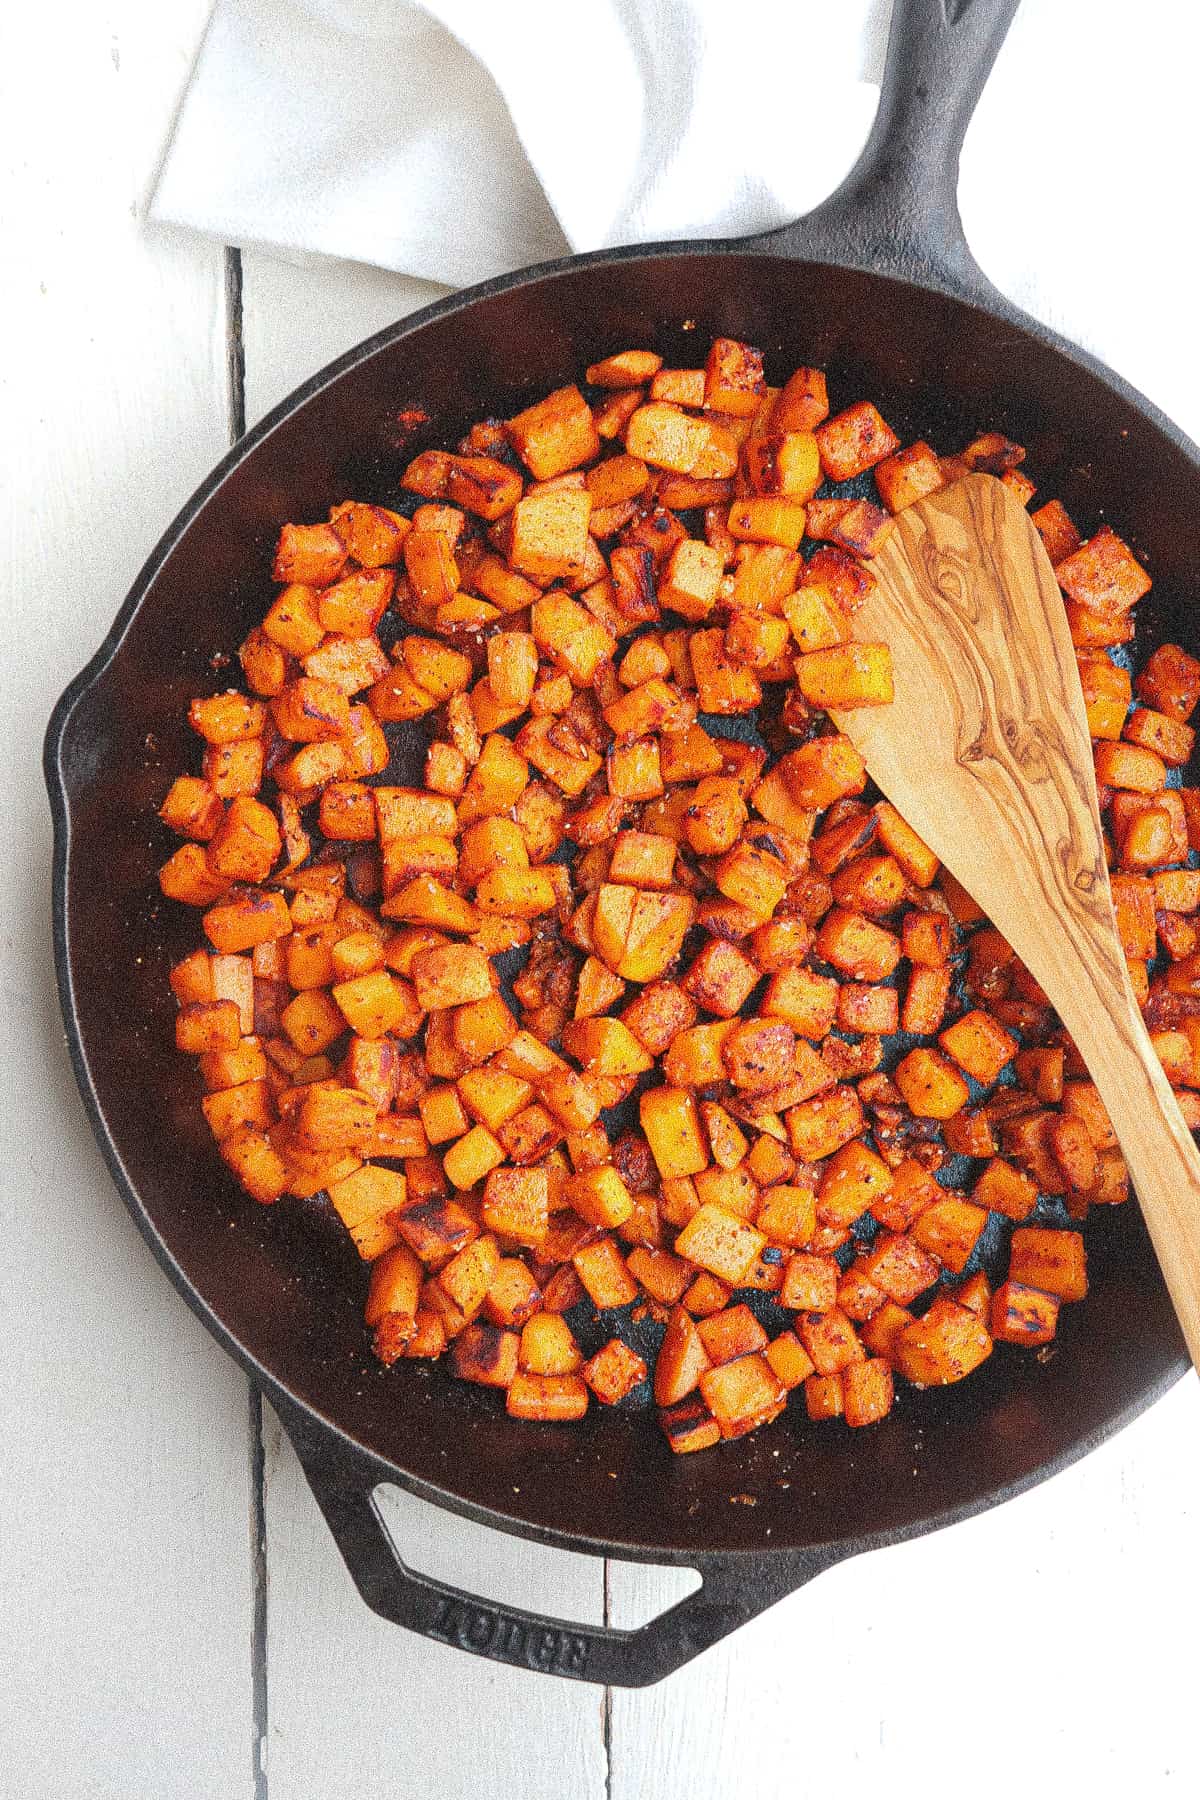 sauteed sweet potatoes in cast iron skillet stirred with a wooden spoon.